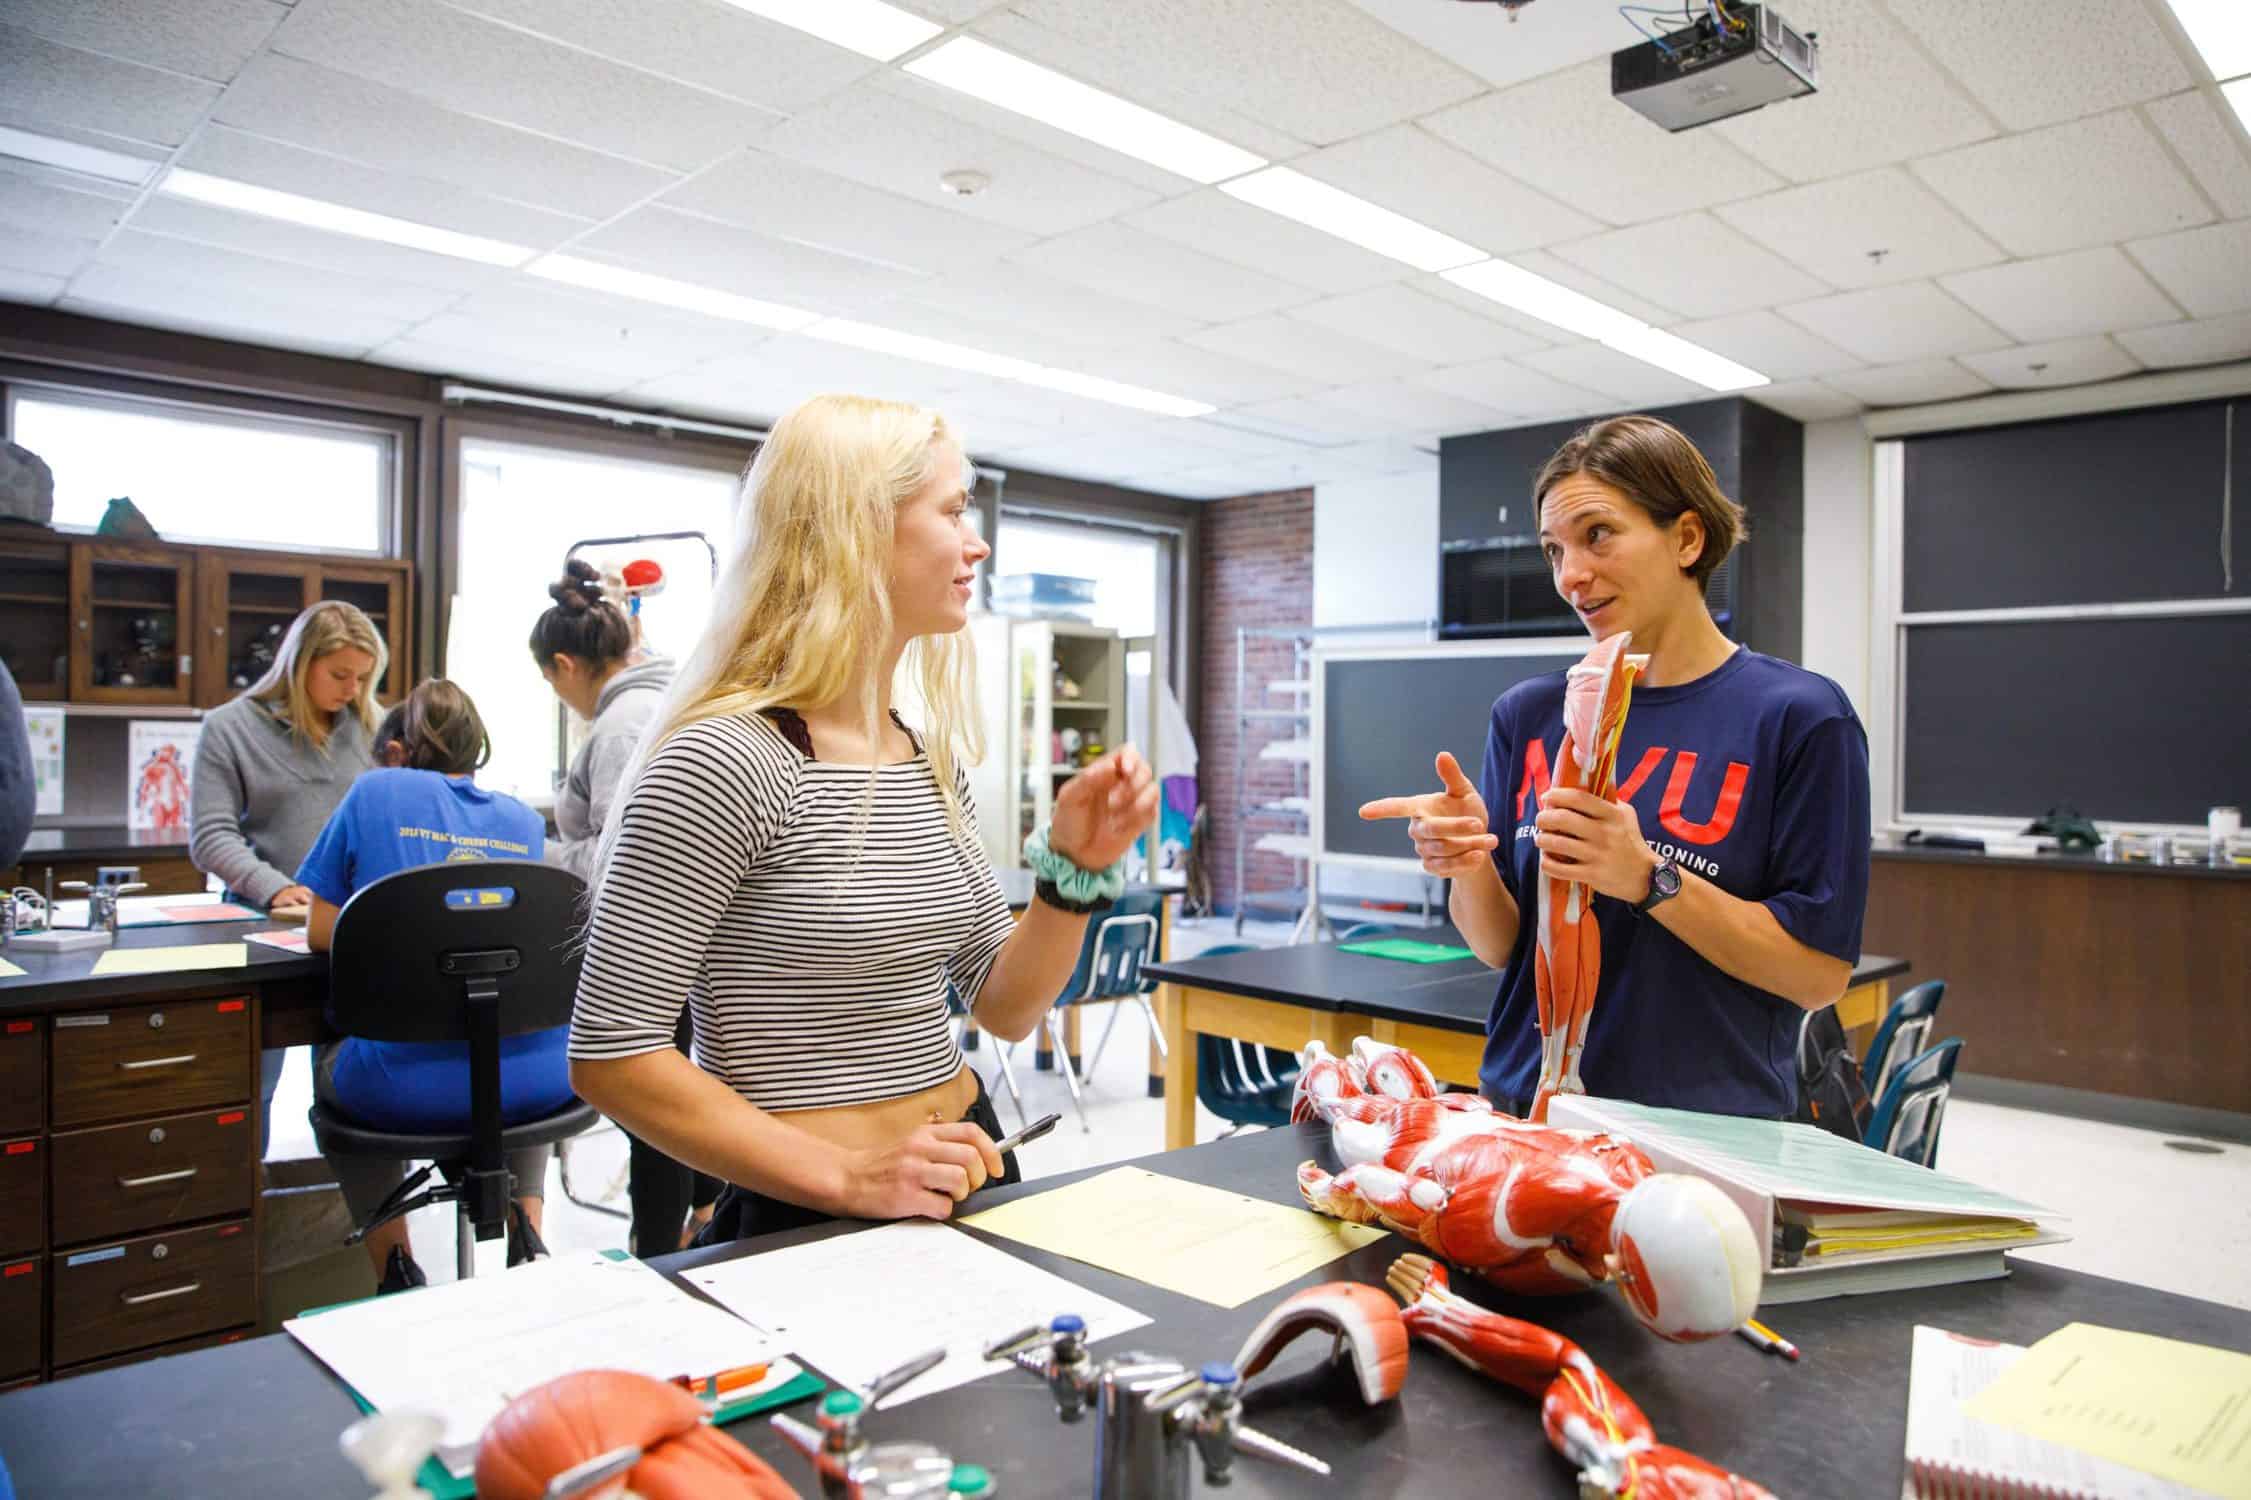 Professor holds a model of a muscles and discusses with a student.